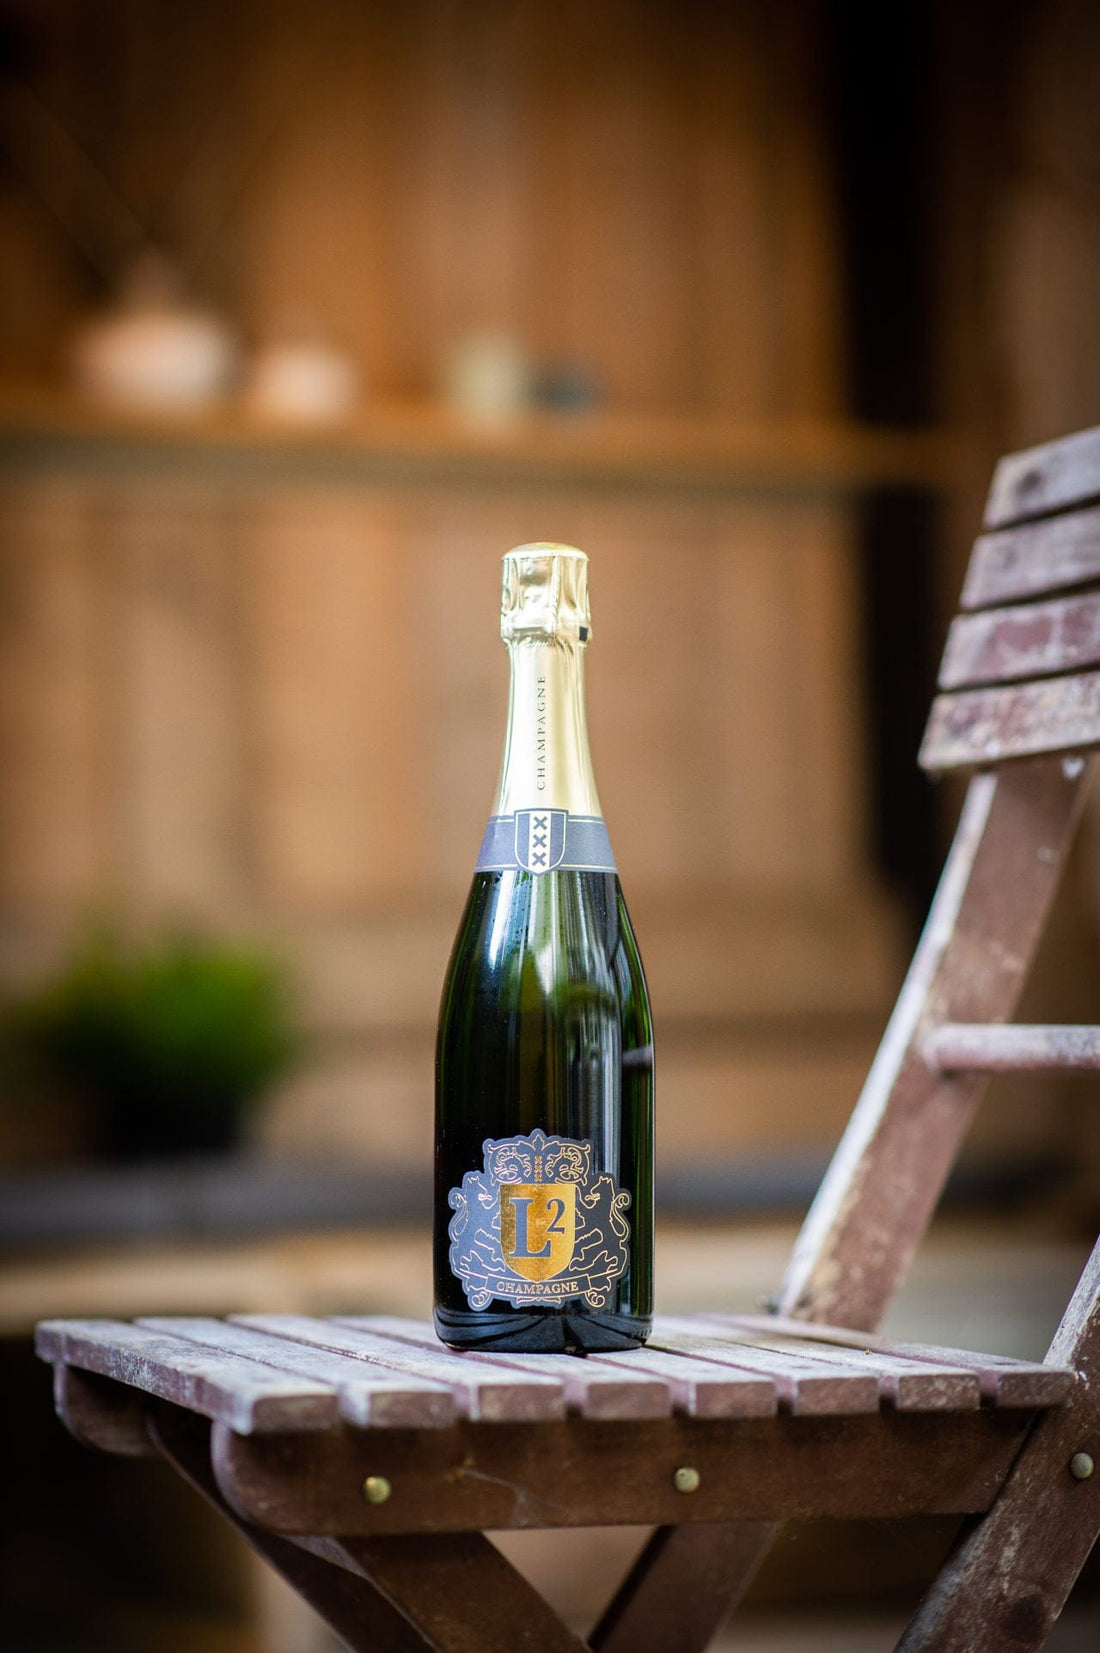 L2 Champagne Extra Brut 750ml|Sustainable|Ecological